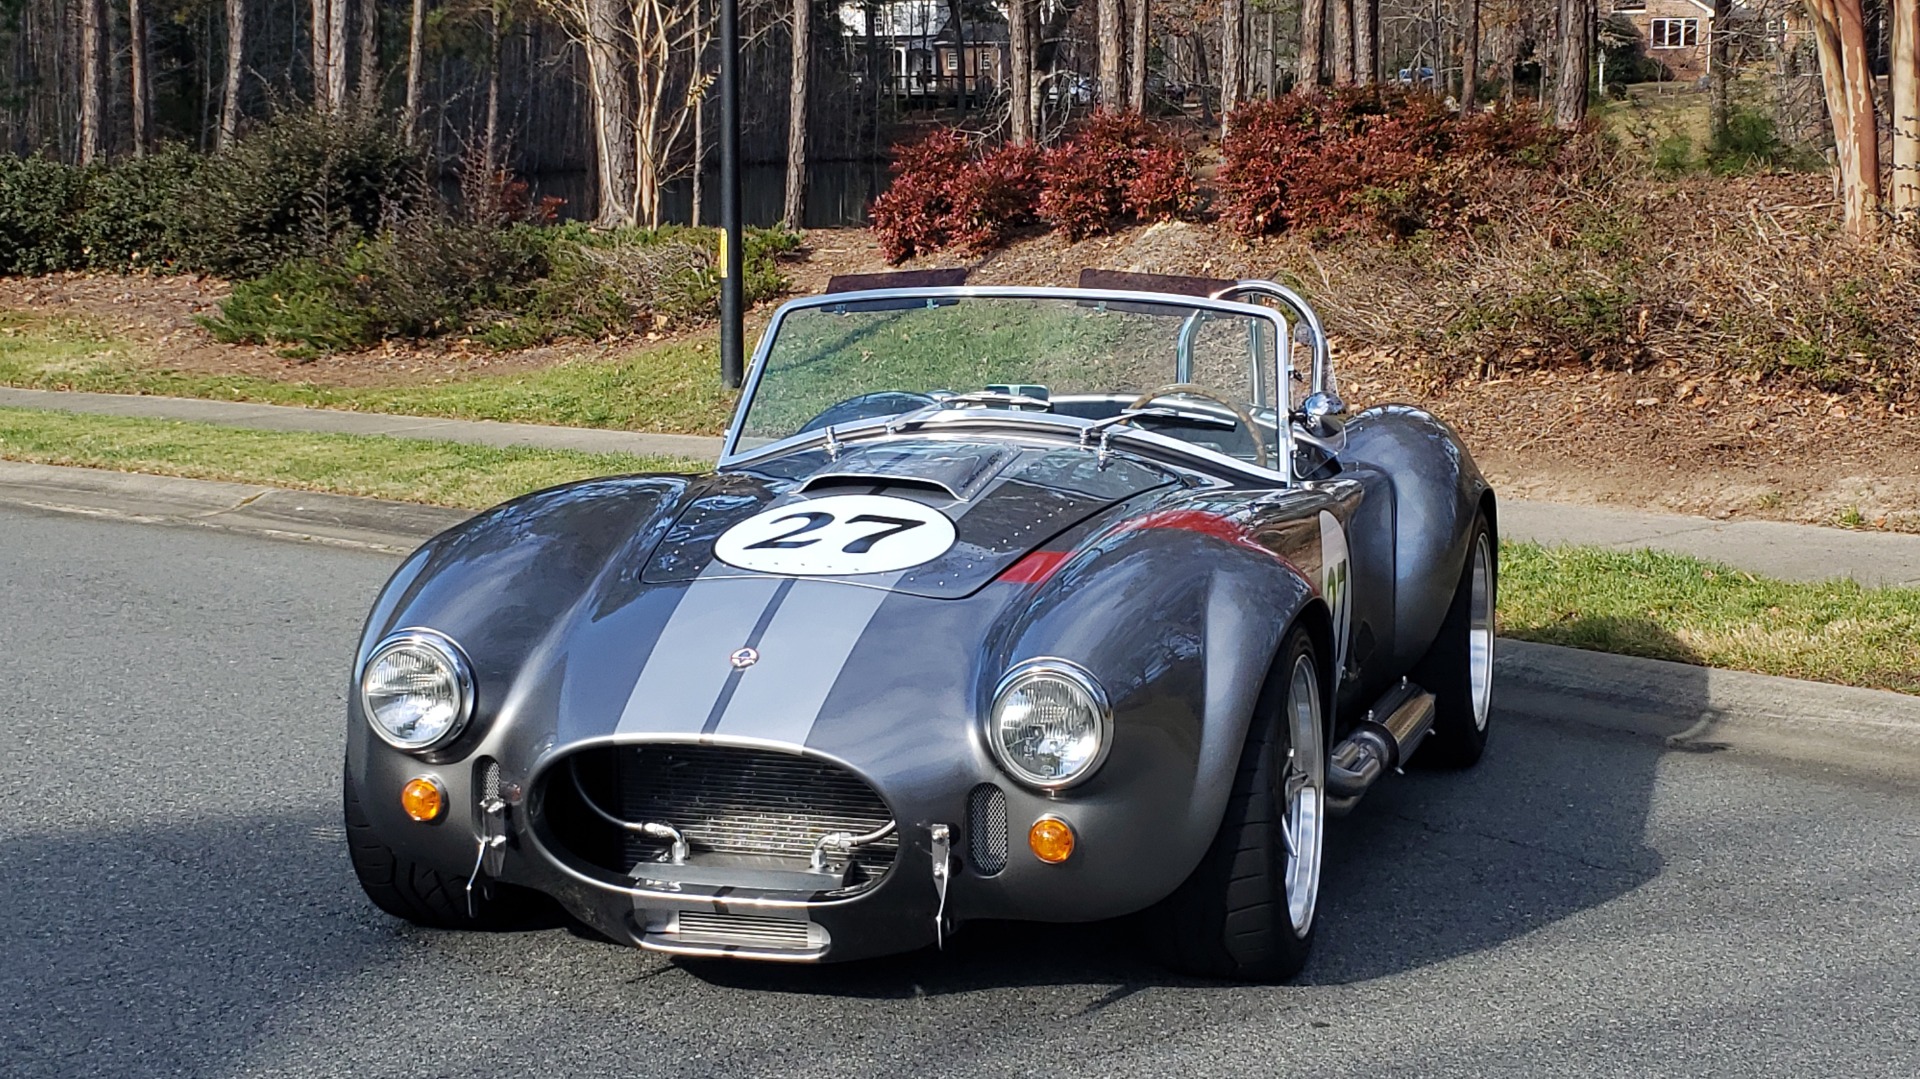 Used 1965 Ford COBRA 427 ROADSTER BY BACKDRAFT RACING ROUSH 553HP V8 / TREMEC 6-SPD / PWR STRNG for sale Sold at Formula Imports in Charlotte NC 28227 3